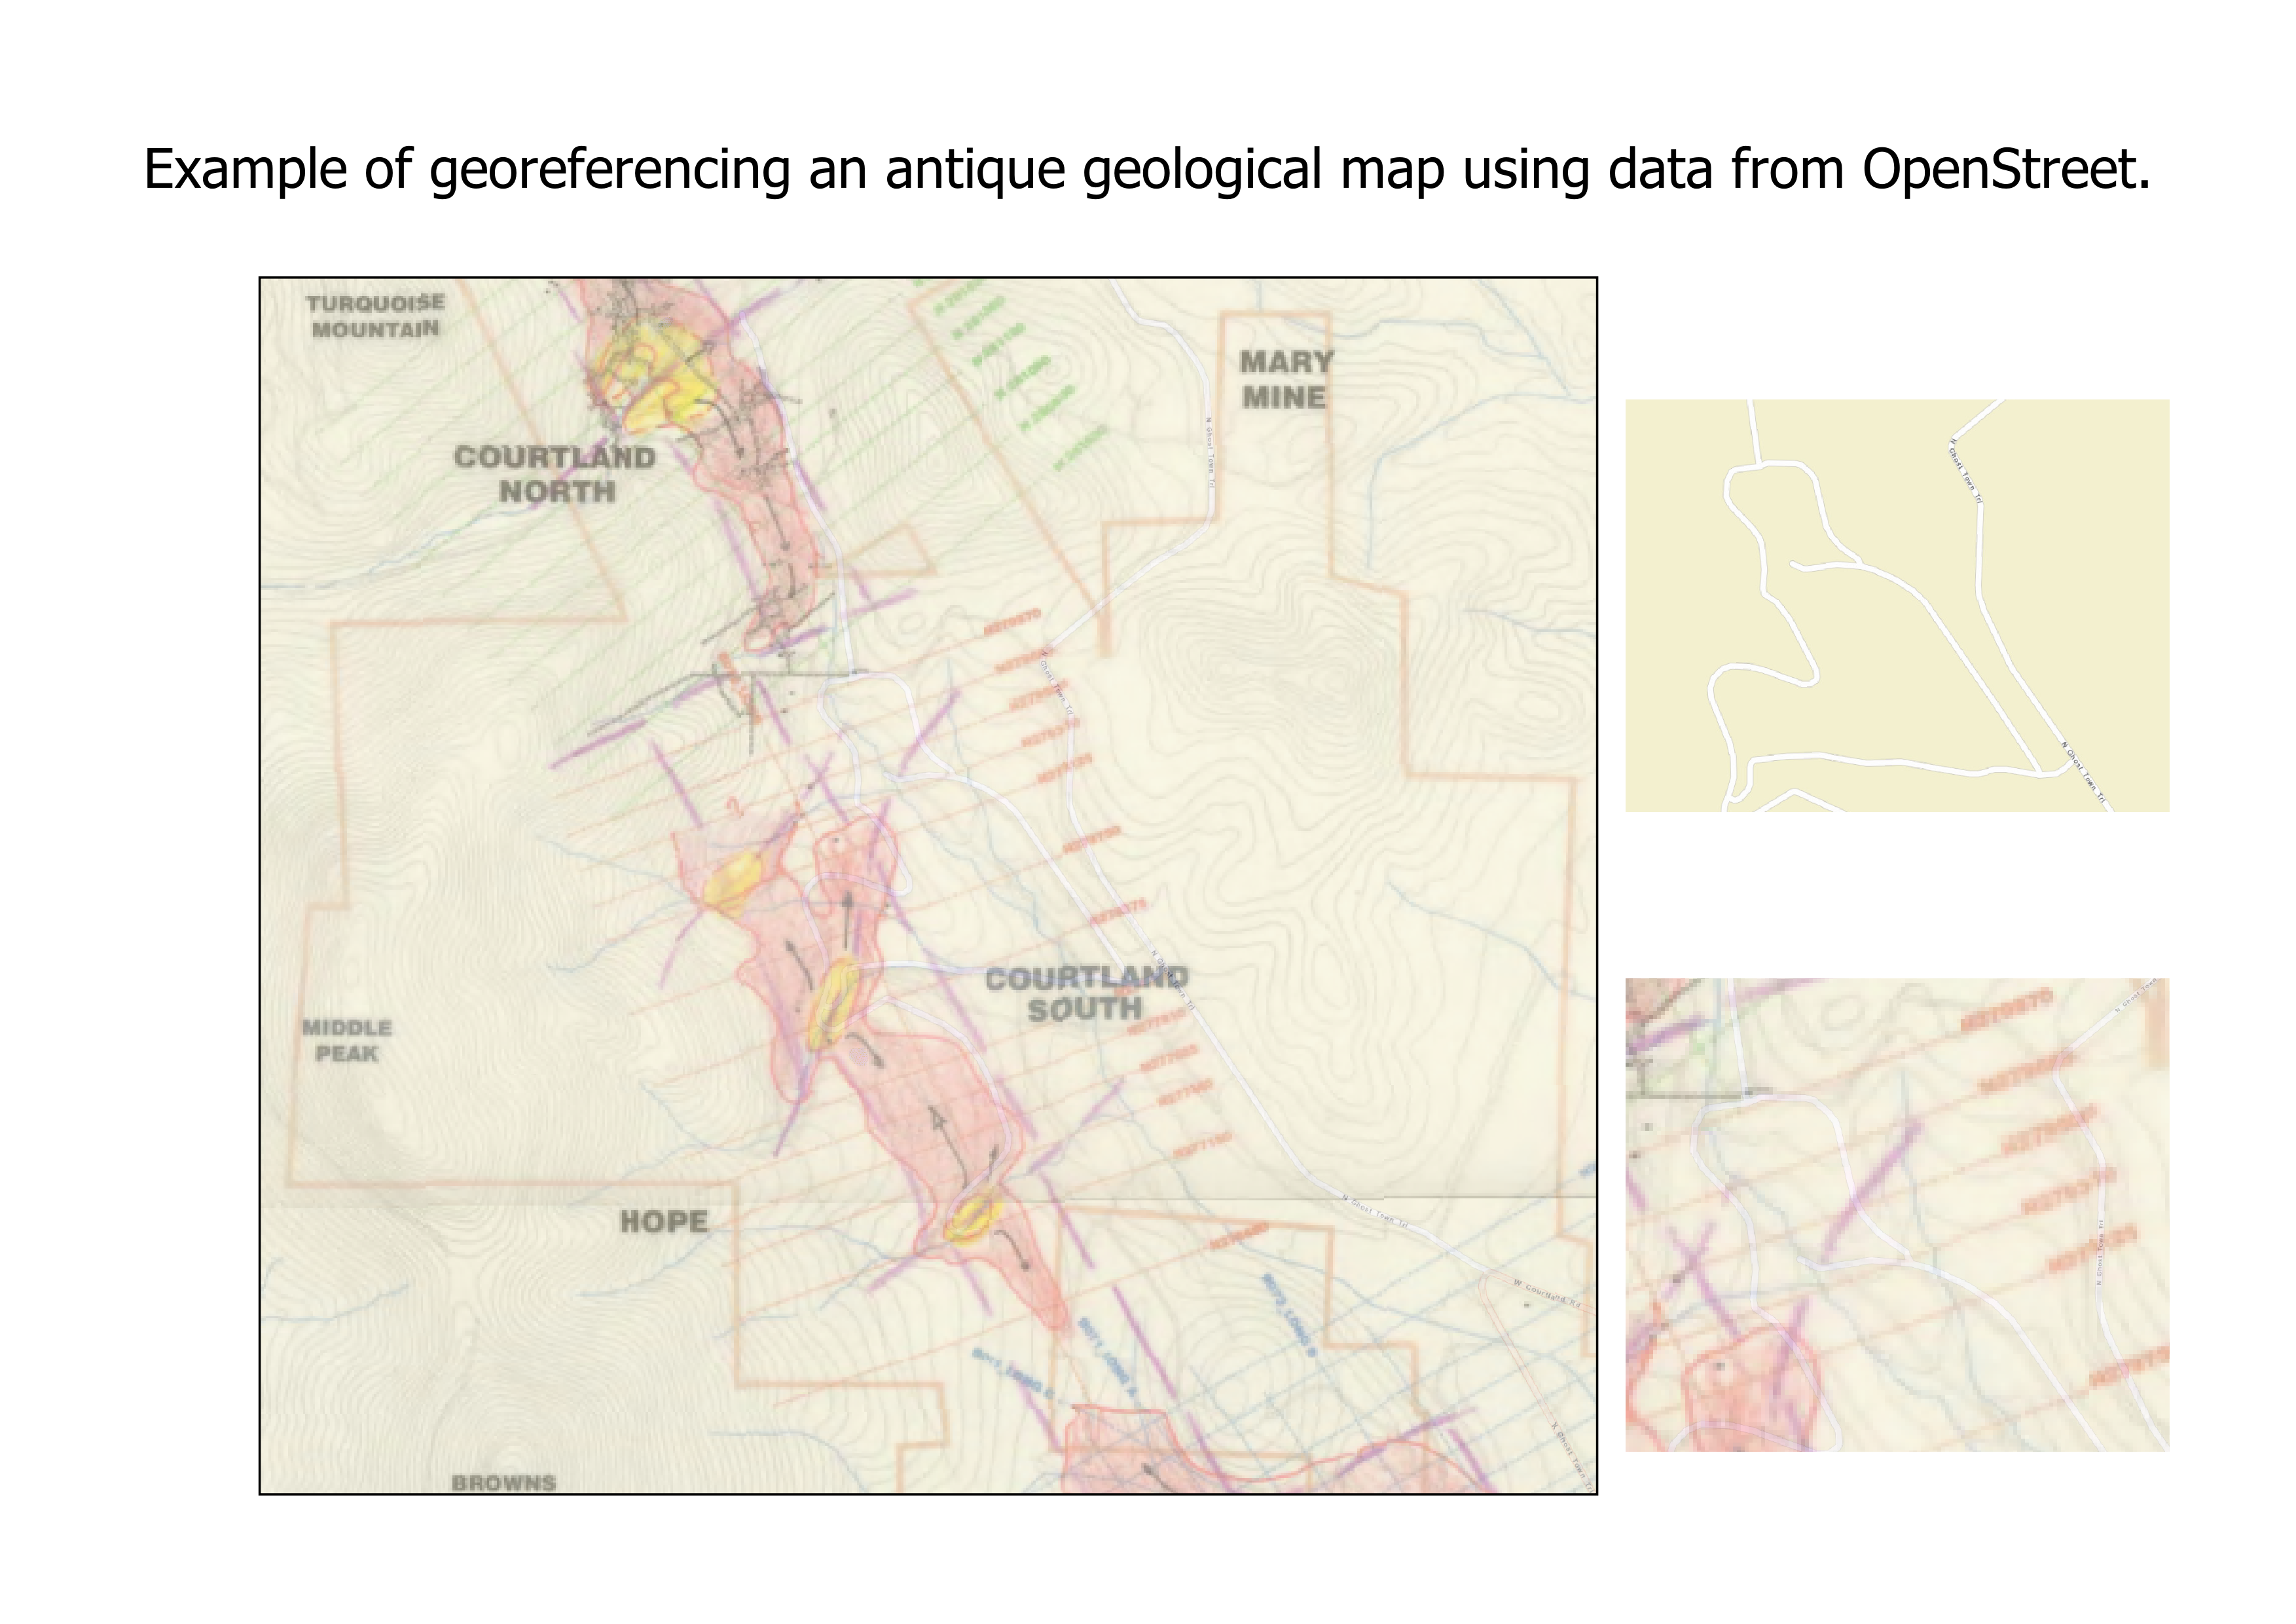 Georeferencing antique geological map.